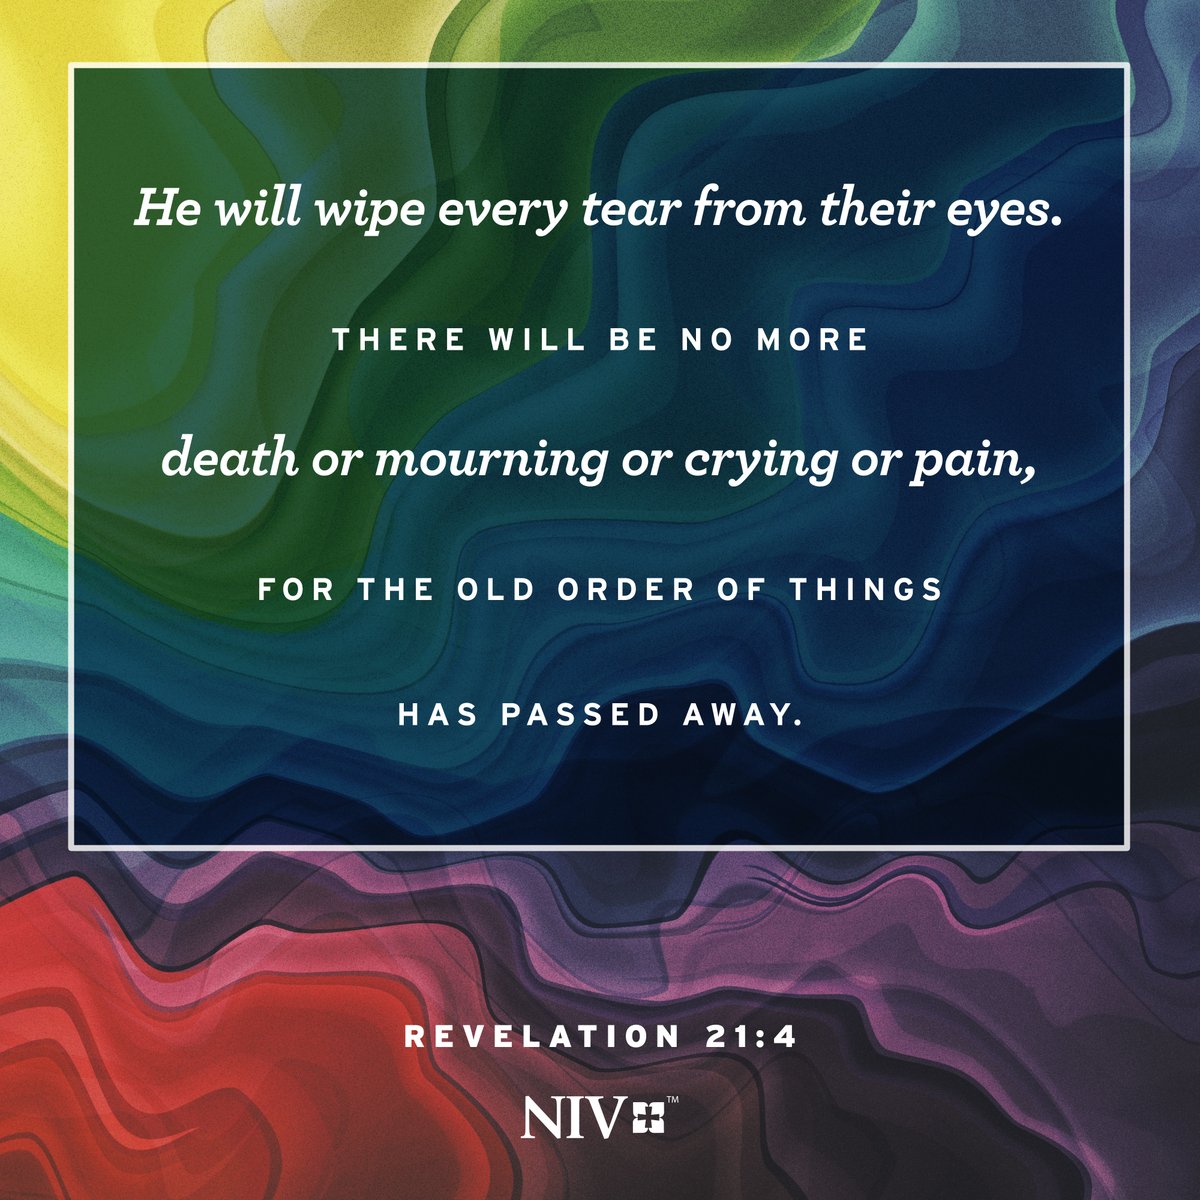 ''He will wipe every tear from their eyes. There will be no more death' or mourning or crying or pain, for the old order of things has passed away.' Revelation 21:4 #NIV #NIVBible #verseoftheday #votd